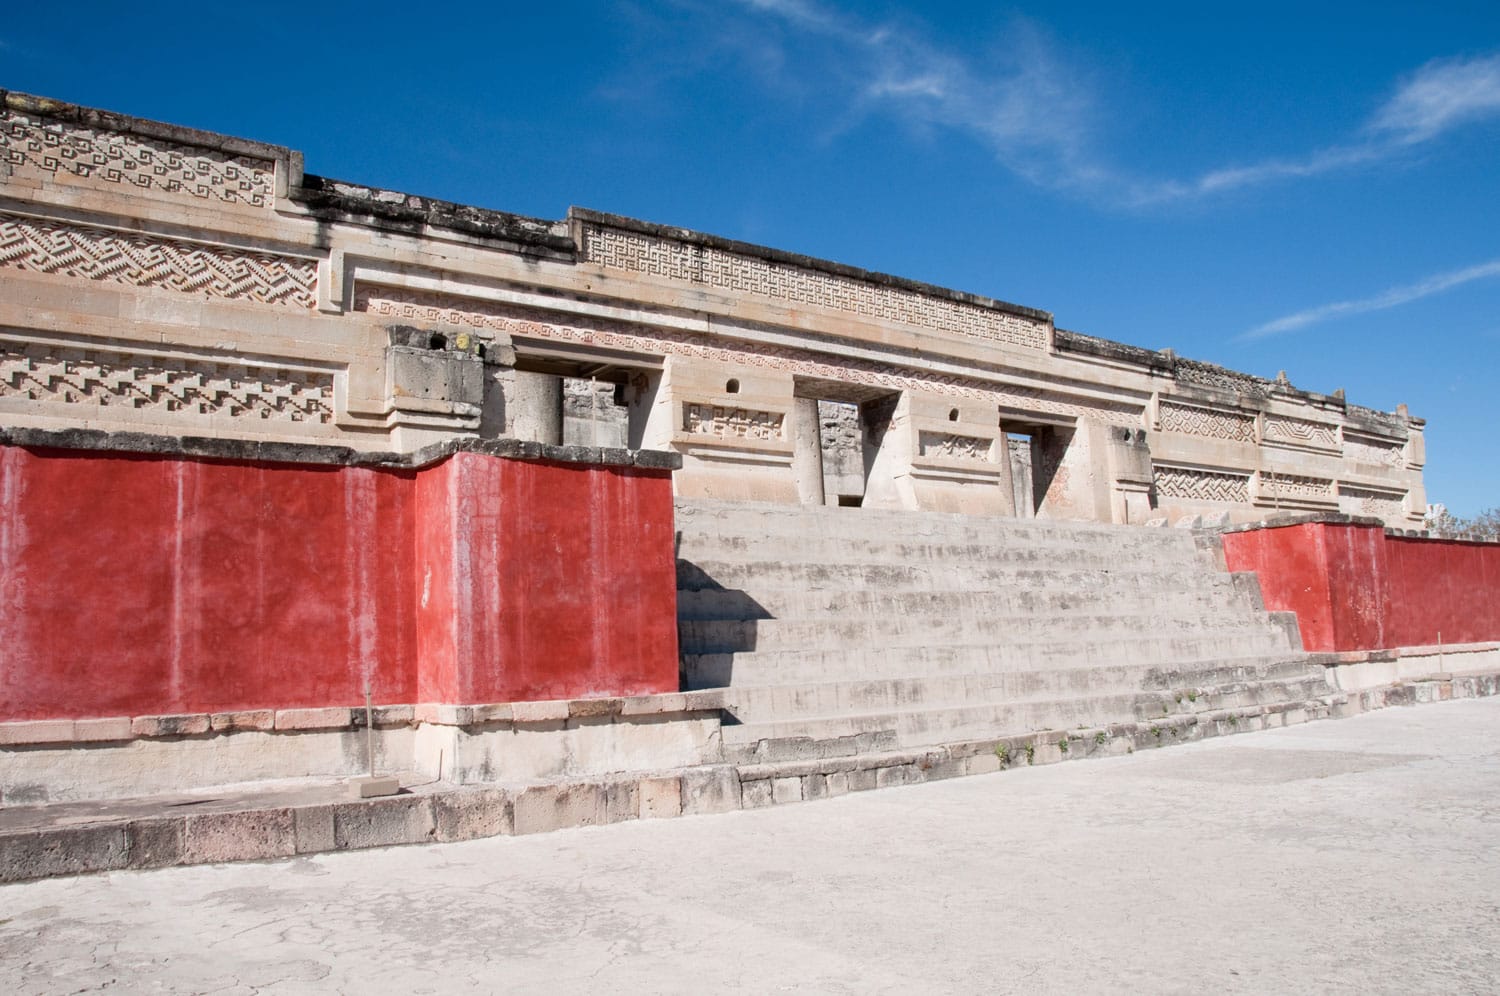 Archaeological site of Mitla, Oaxaca (Mexico)